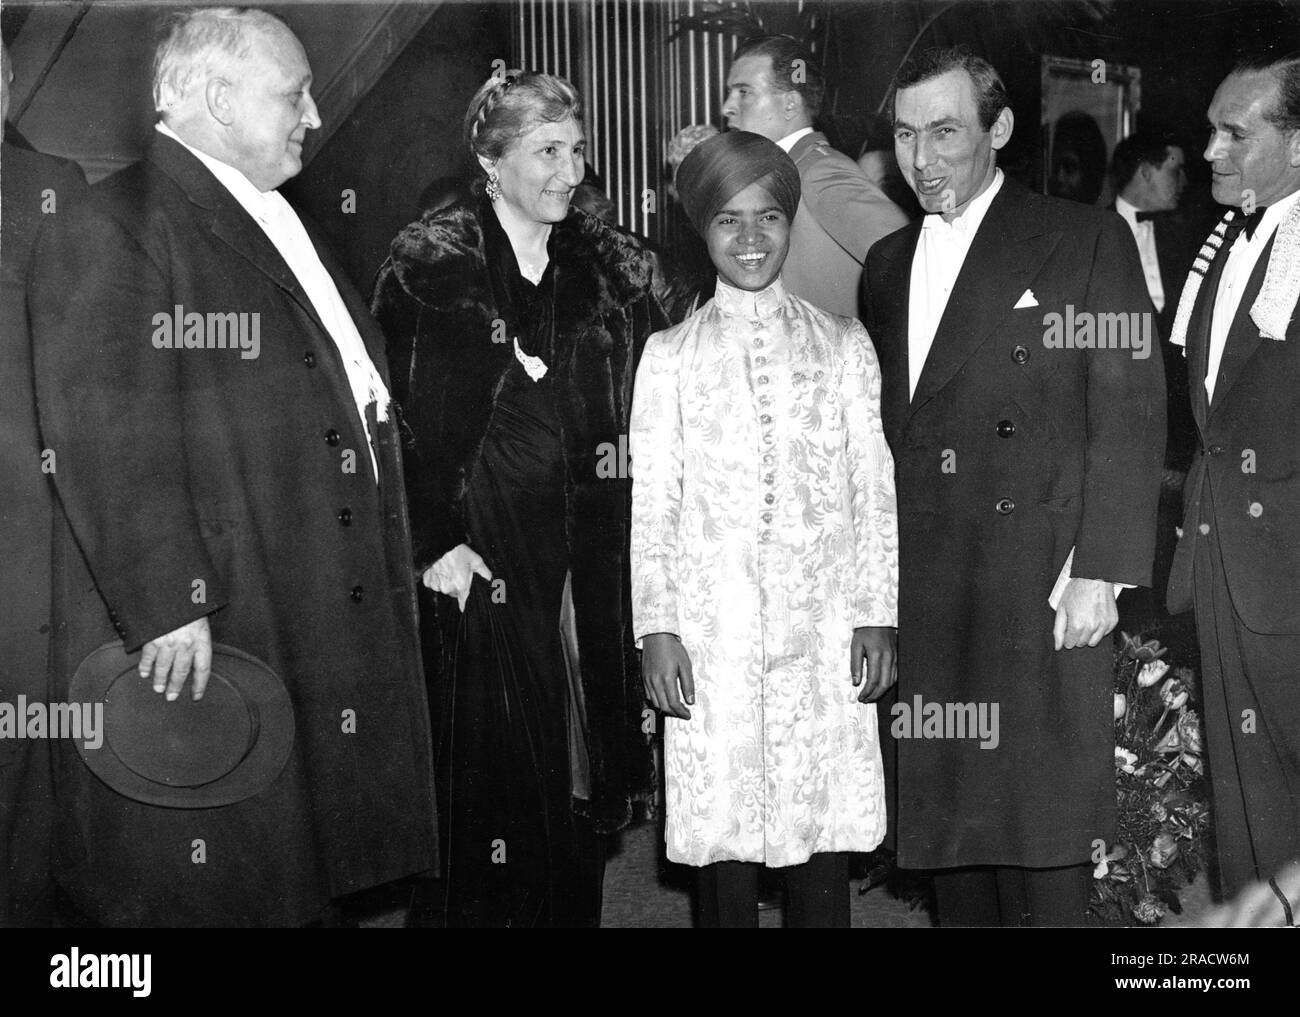 Director ROBERT J. FLAHERTY and his wife with SABU and his Co-Director ZOLTAN KORDA at the London Premiere on 7th April 1937 at the Leicester Square Theatre in London of ELEPHANT BOY 1937 story Toomai of the Elephants by Rudyard Kipling producer Alexander Korda London Film Productions / United Artists Stock Photo